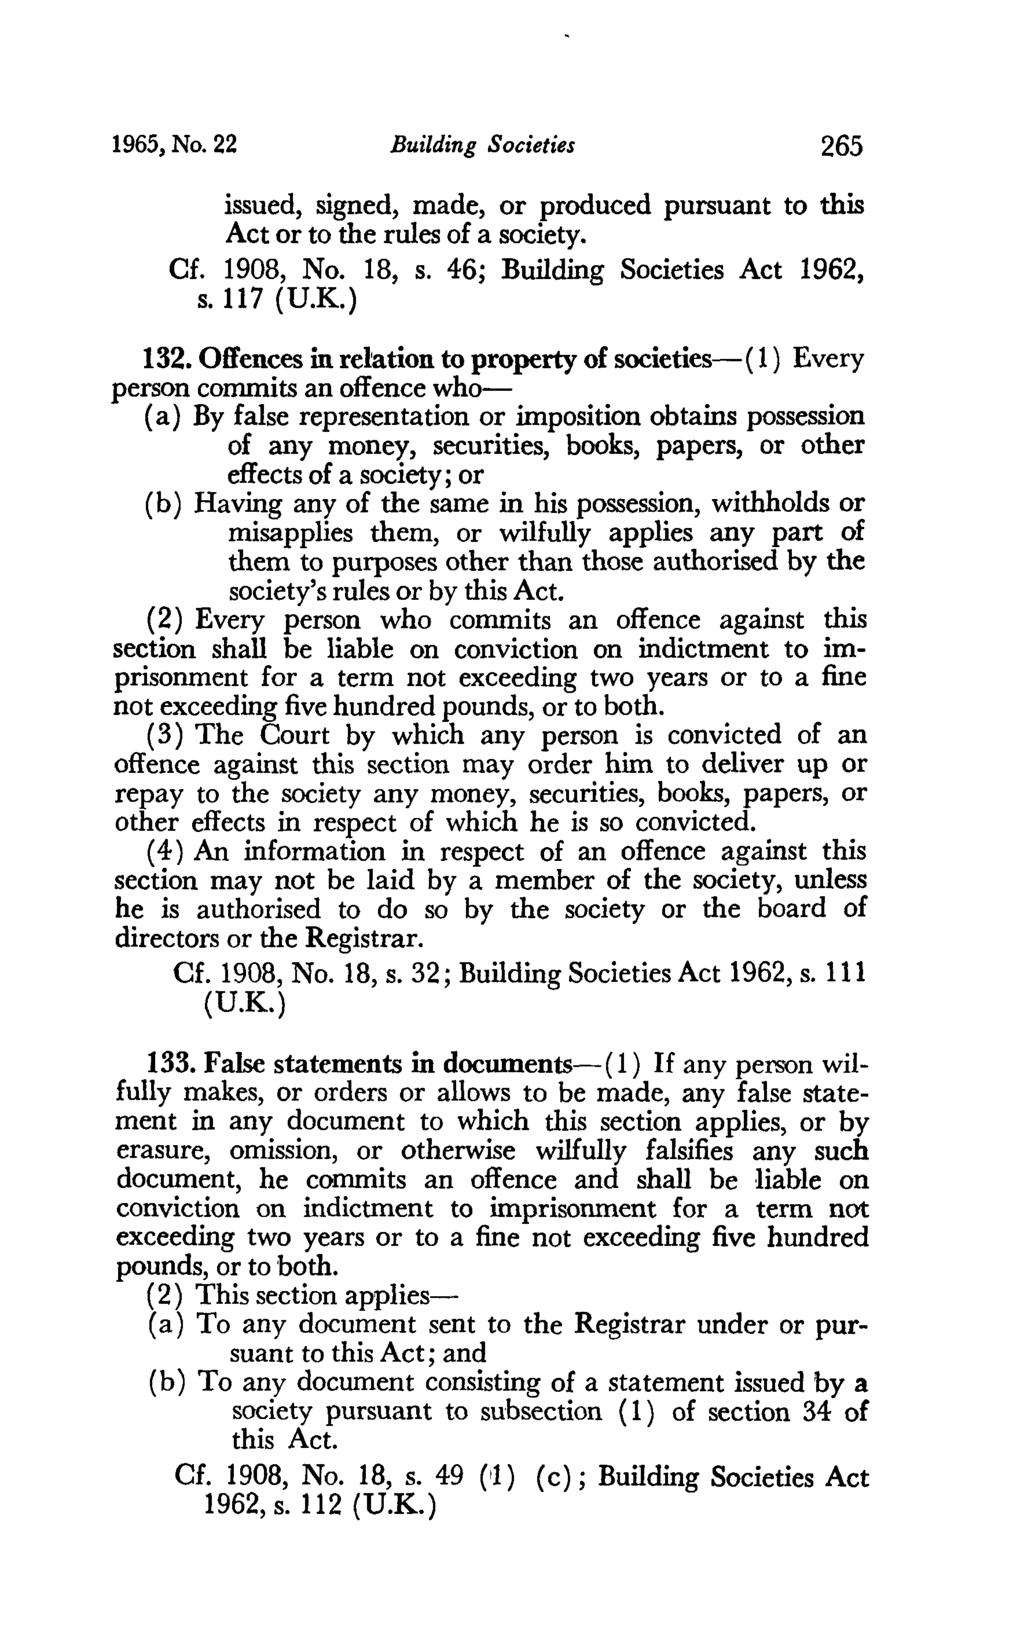 1965, No. 22 Building Societies 265 issued, signed, made, or produced pursuant to this Act or to the rules of a society. Cf. 1908, No. 18, s. 46; Building Societies Act 1962, s. 117 (U.K.) 132.